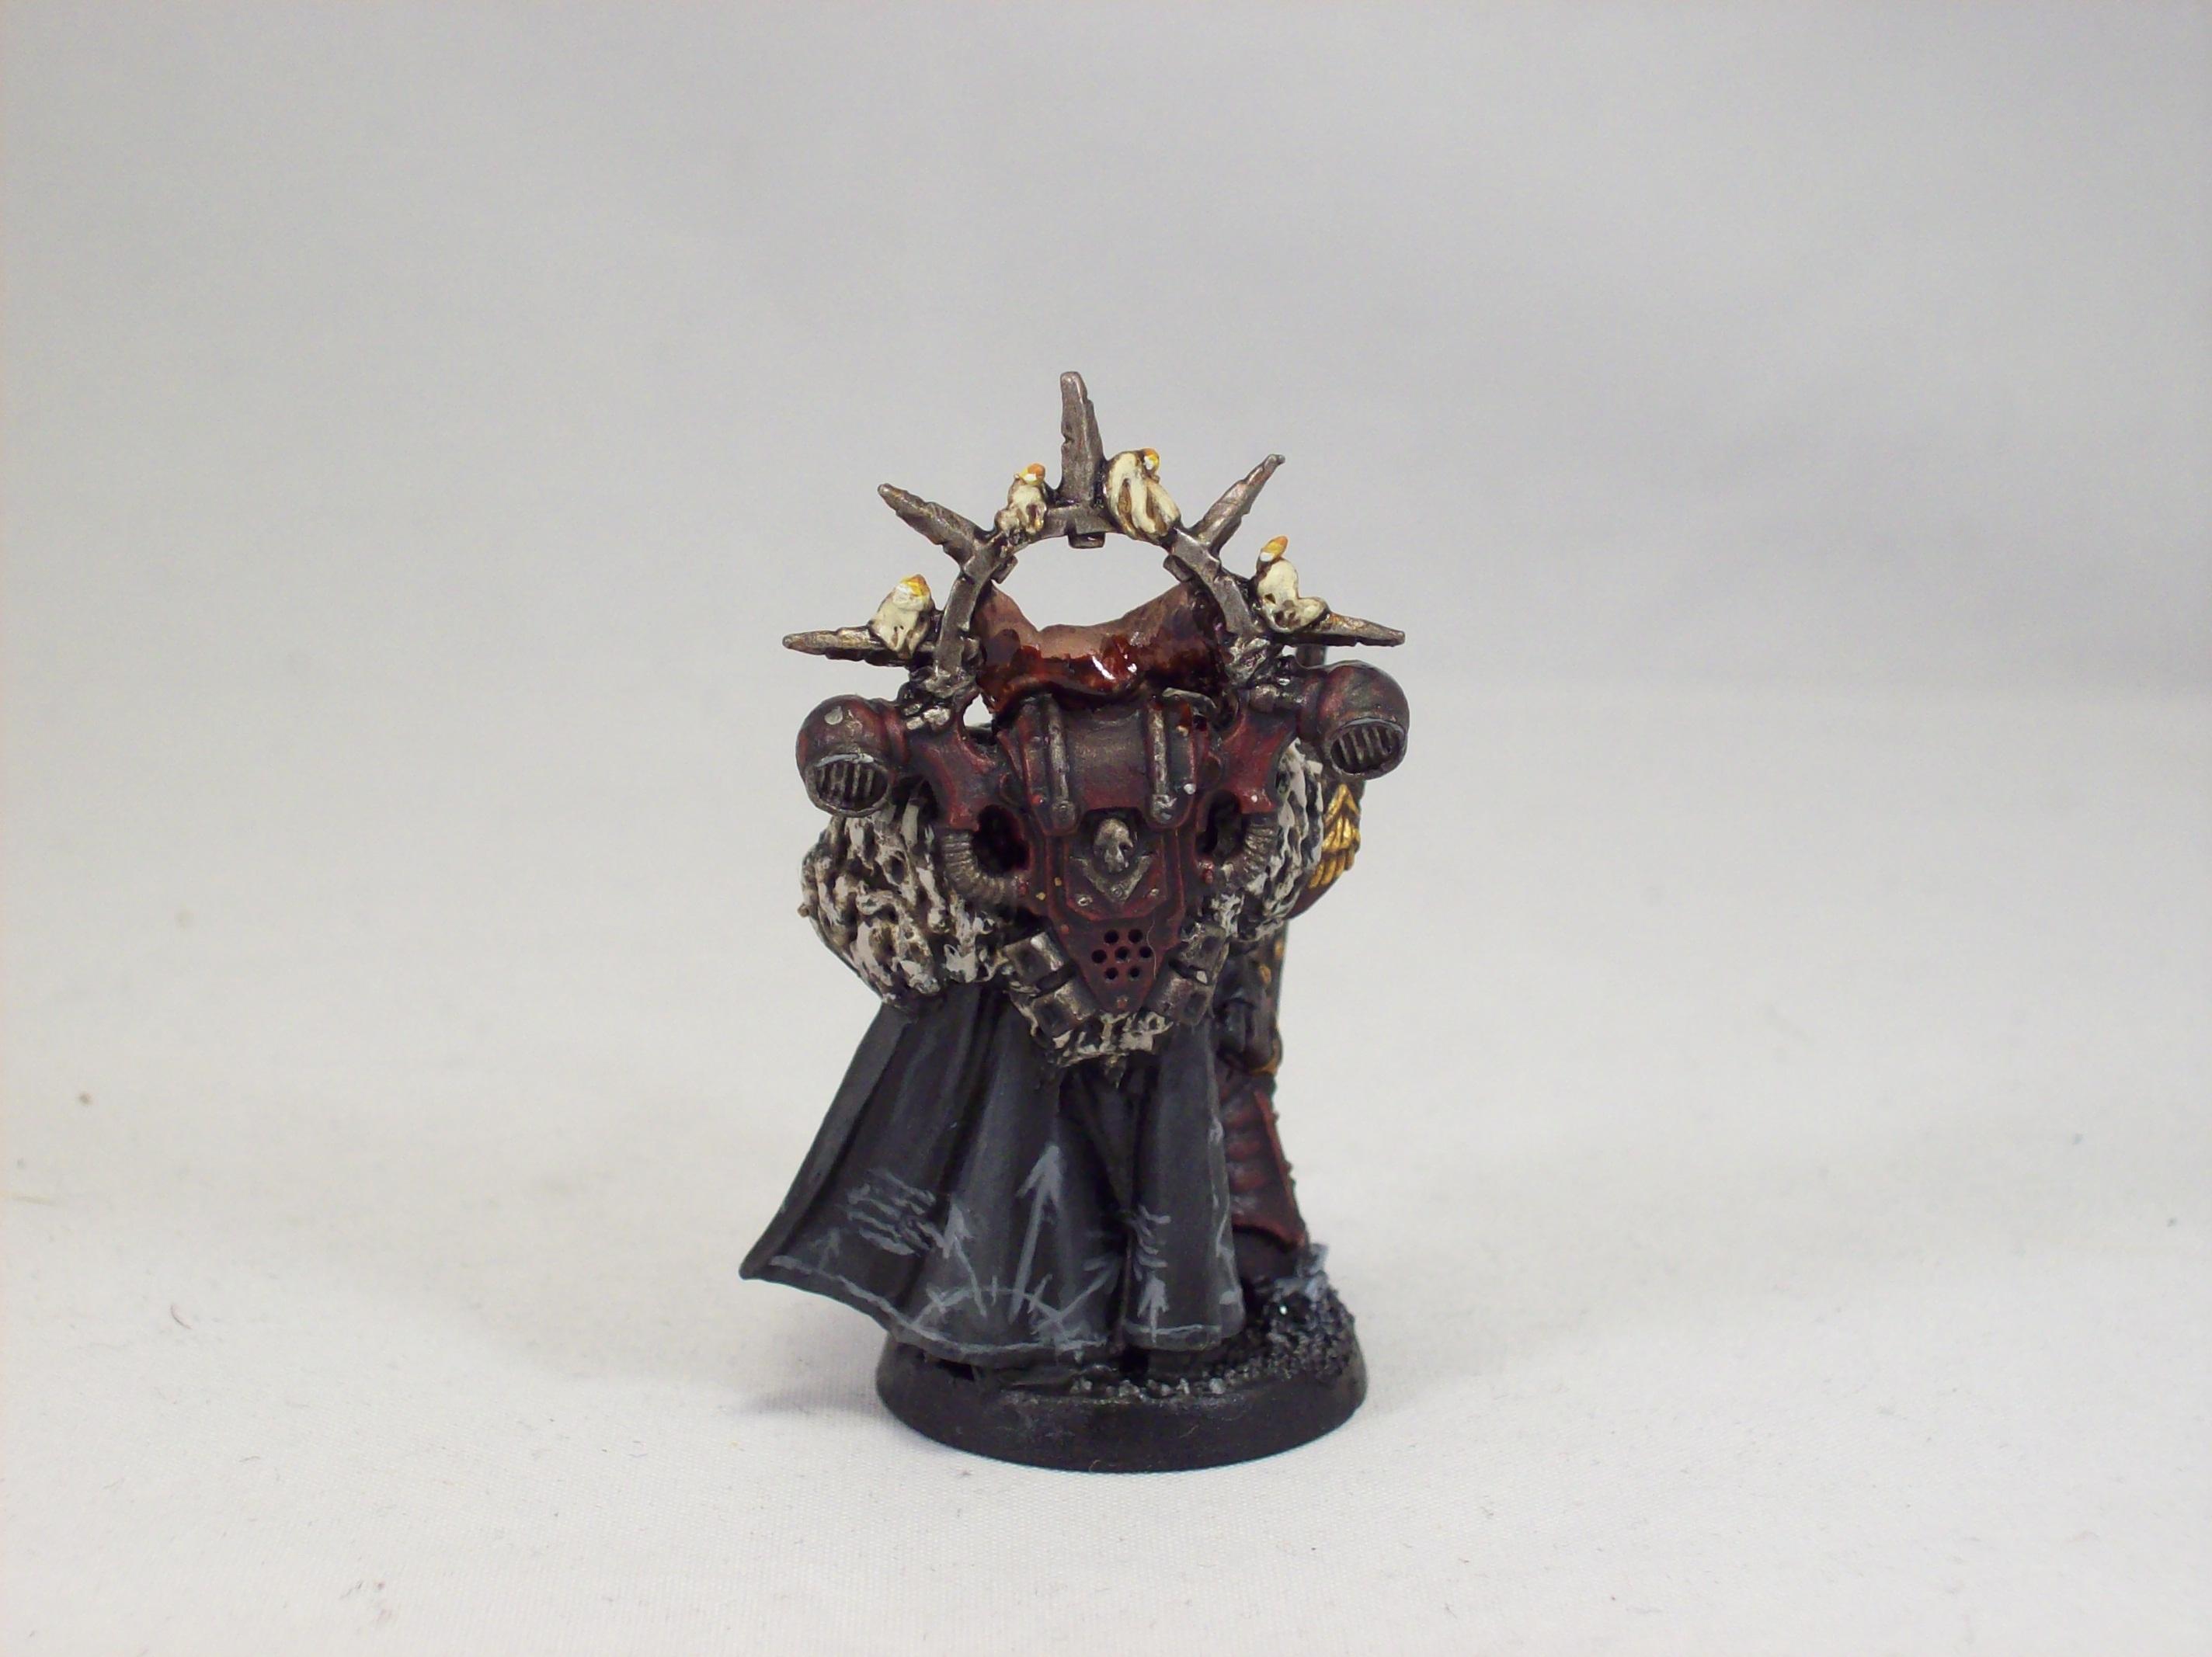 Chaos Lord, Chaos Space Marines, Warhammer 40,000, Word Bearers